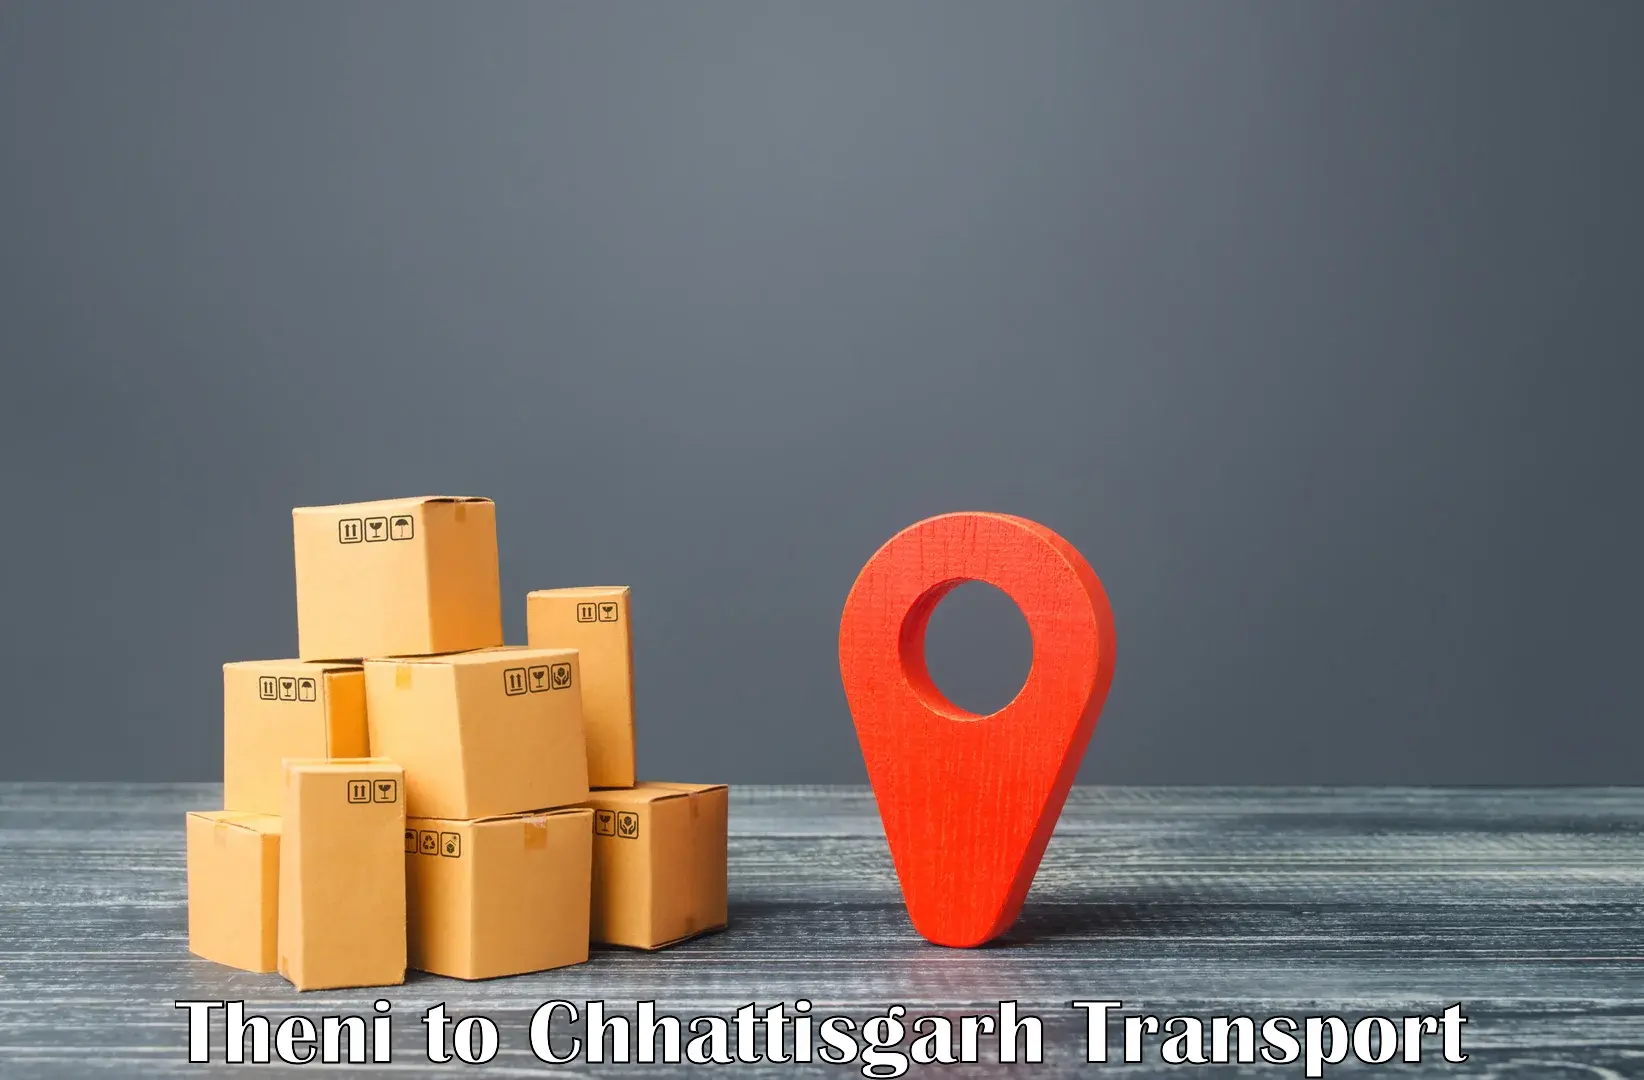 Nationwide transport services Theni to Raigarh